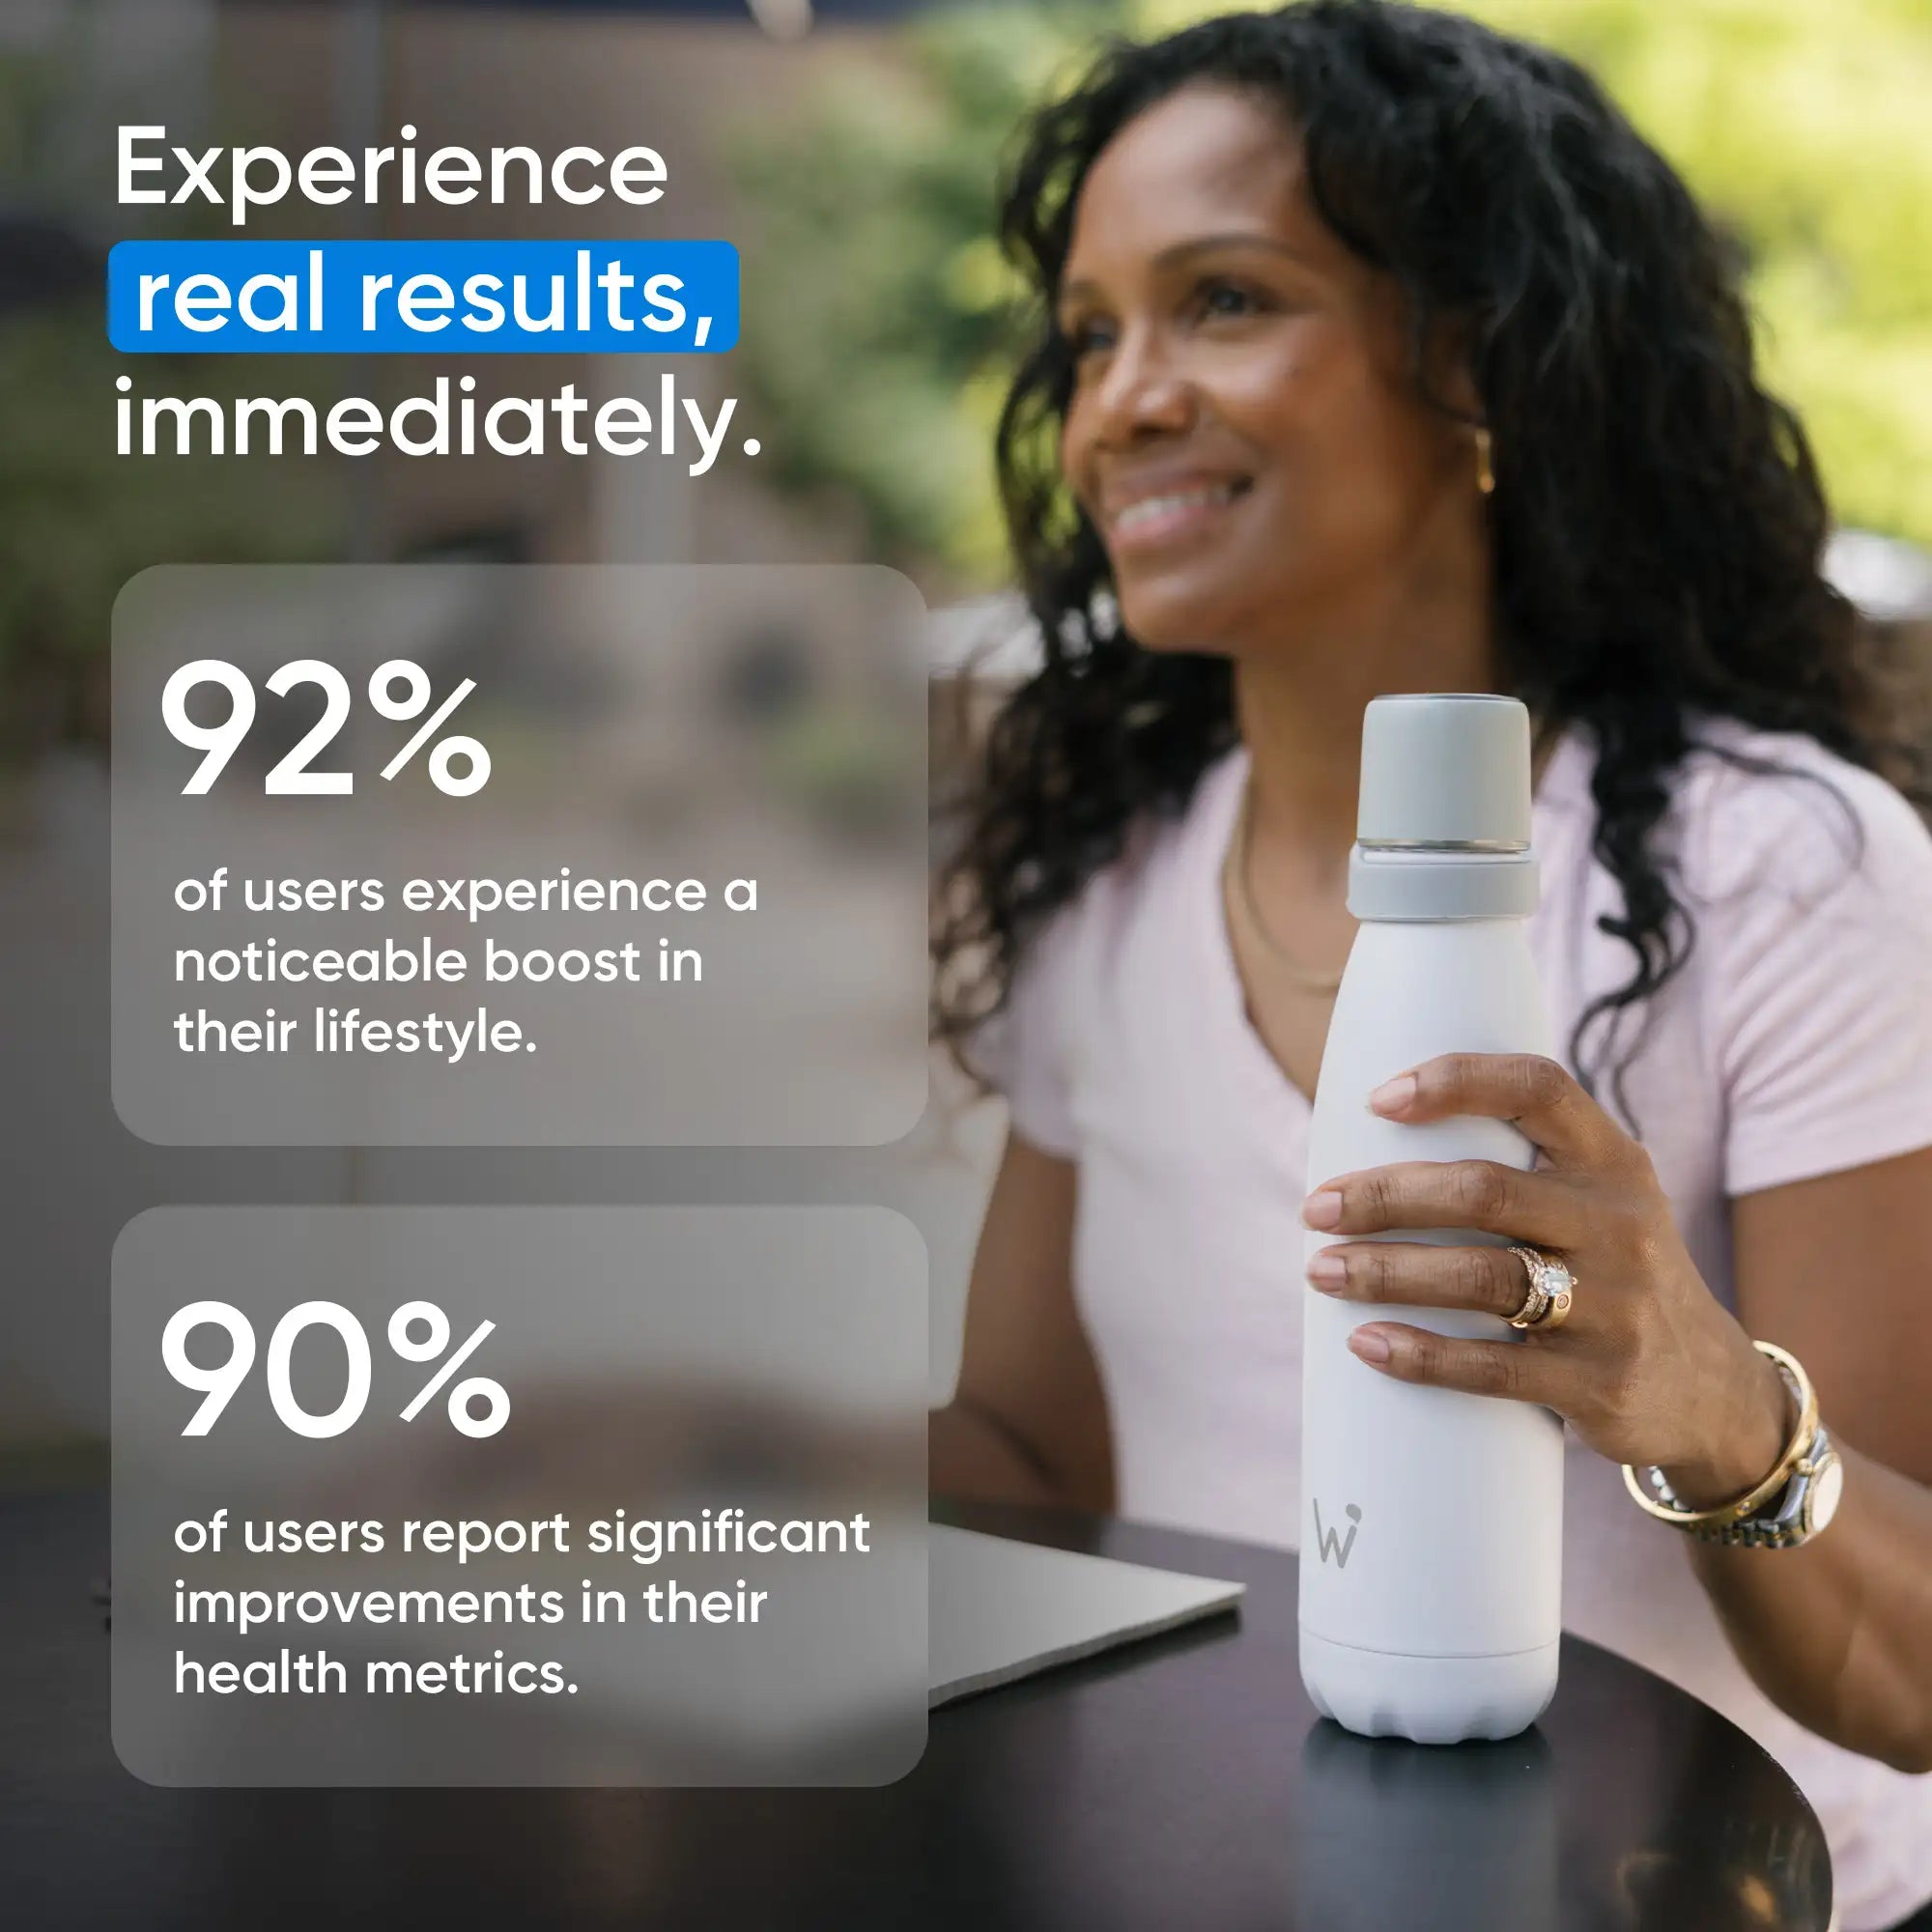 Experience real results, immediately. 92% of users experience a noticeable boost in their lifestyle. 90% of users report significant improvements in their health metrics.